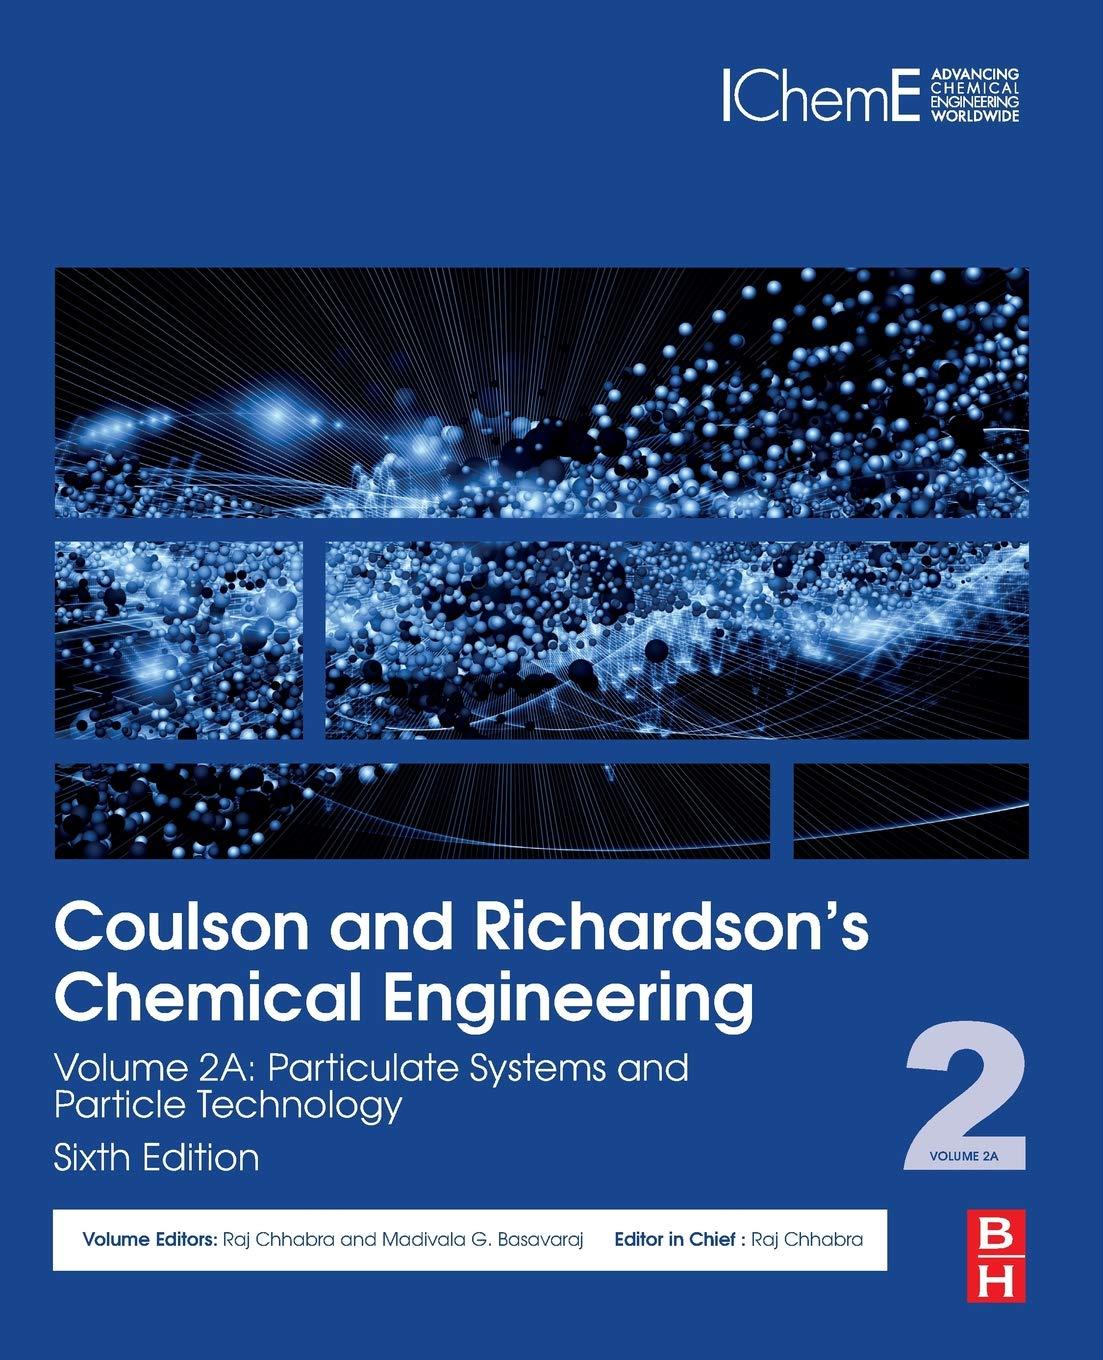 coulson and richardsons chemical engineering volume 2a particulate systems and particle technology 6th